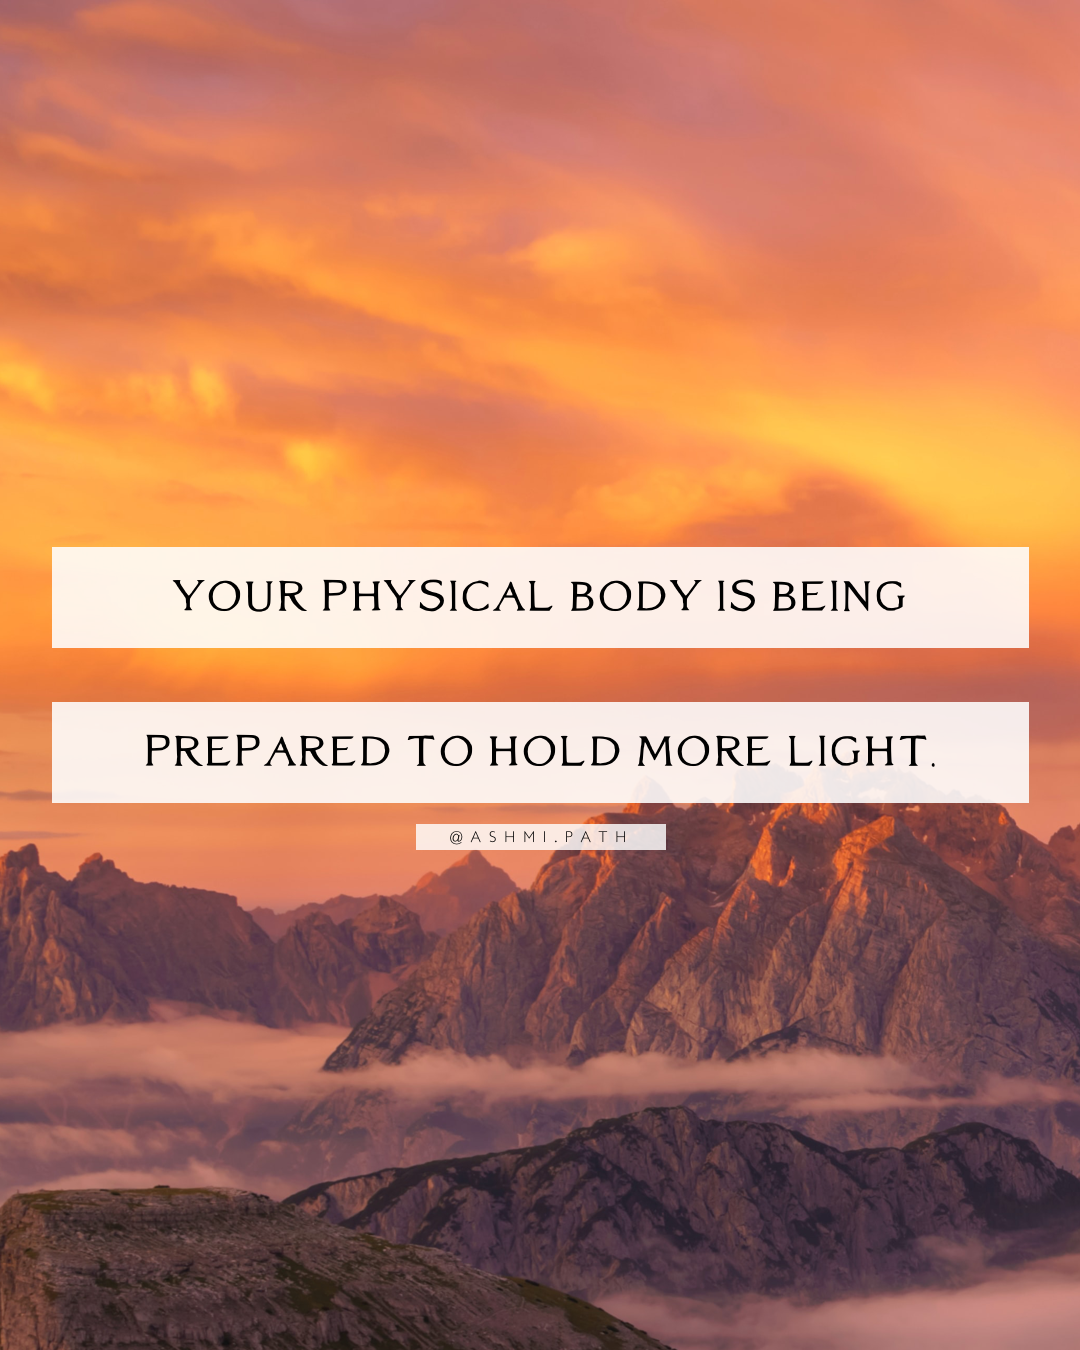 Your Physical Body is Being Prepared to Hold More Light